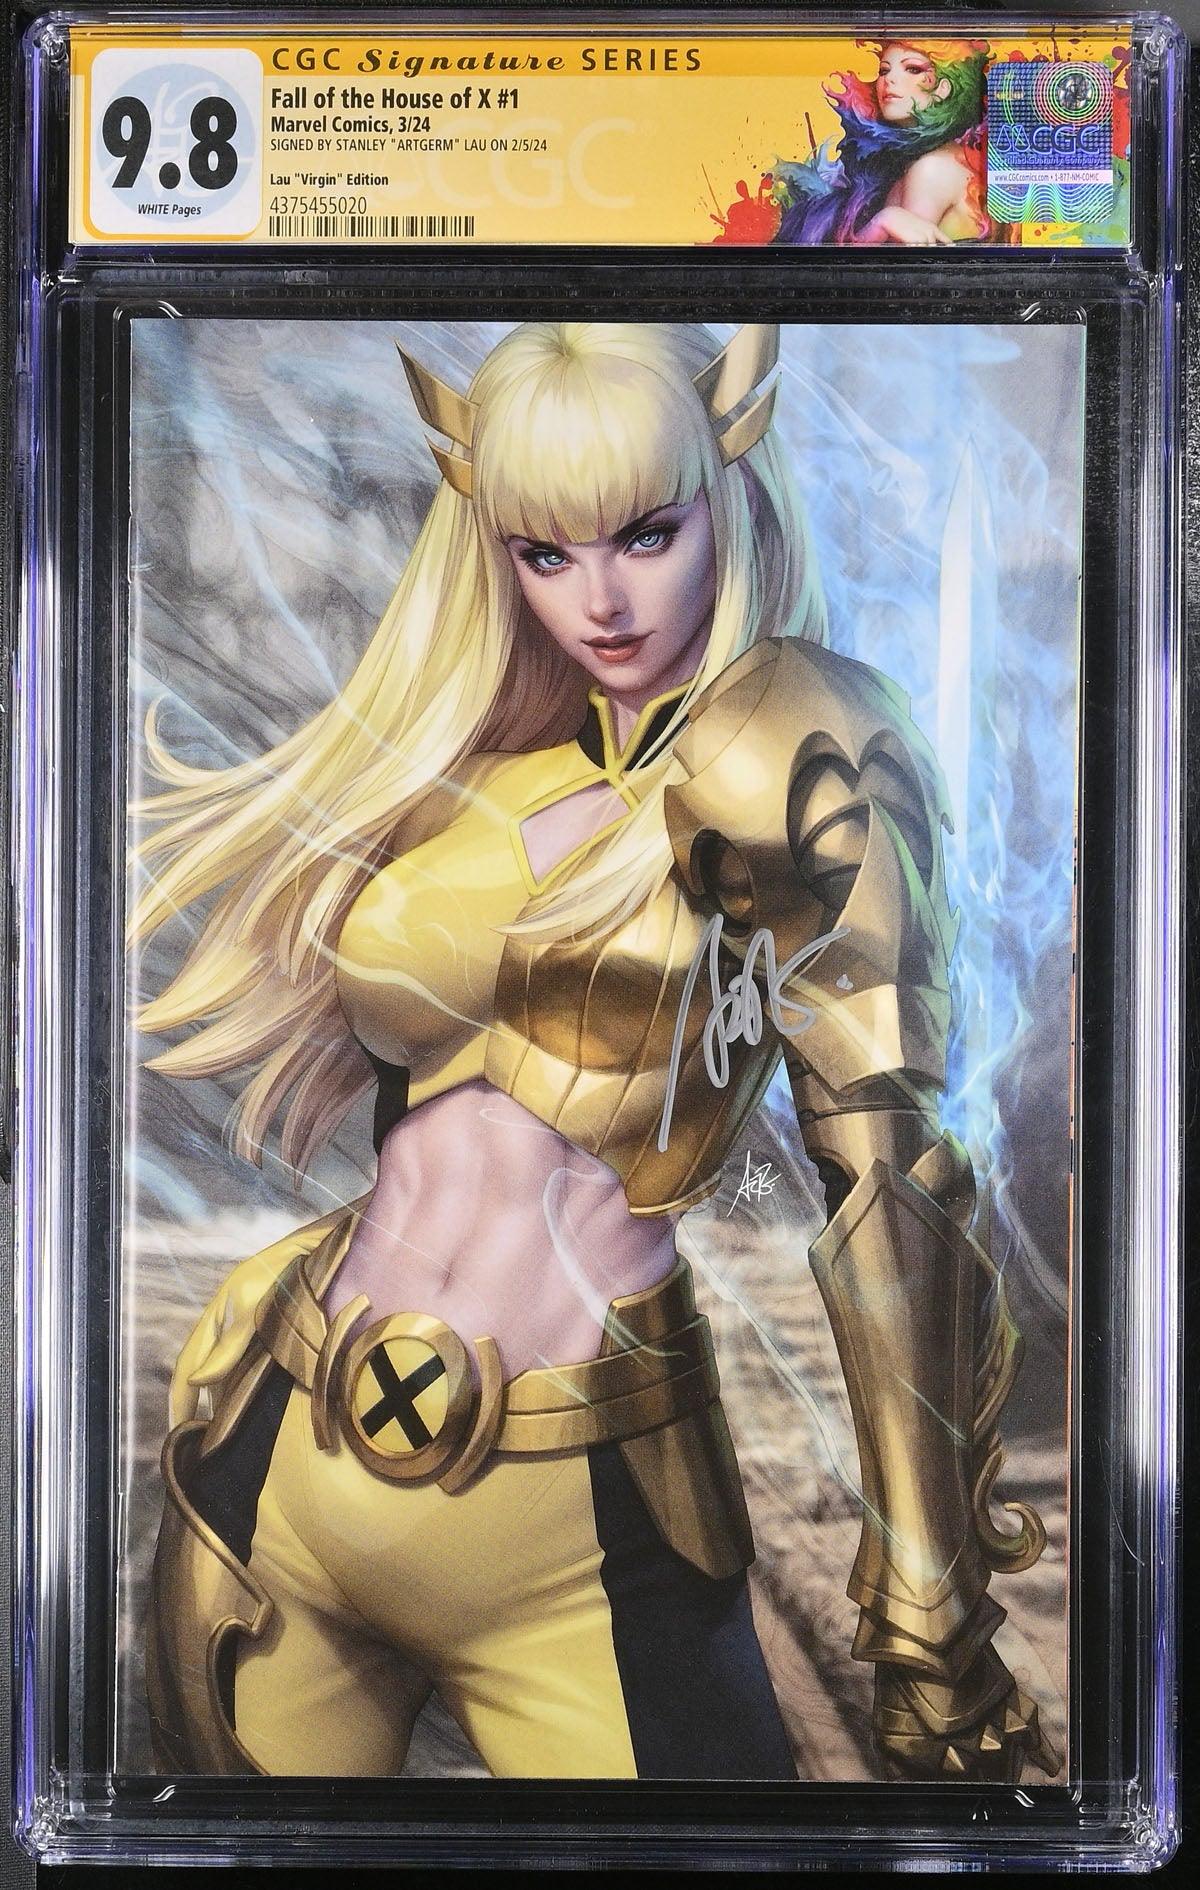 CGC FALL OF THE HOUSE OF X #1 1:50 LAU "VIRGIN" EDITION (9.8) SIGNATURE SERIES - SIGNED BY STANLEY "ARTGERM"